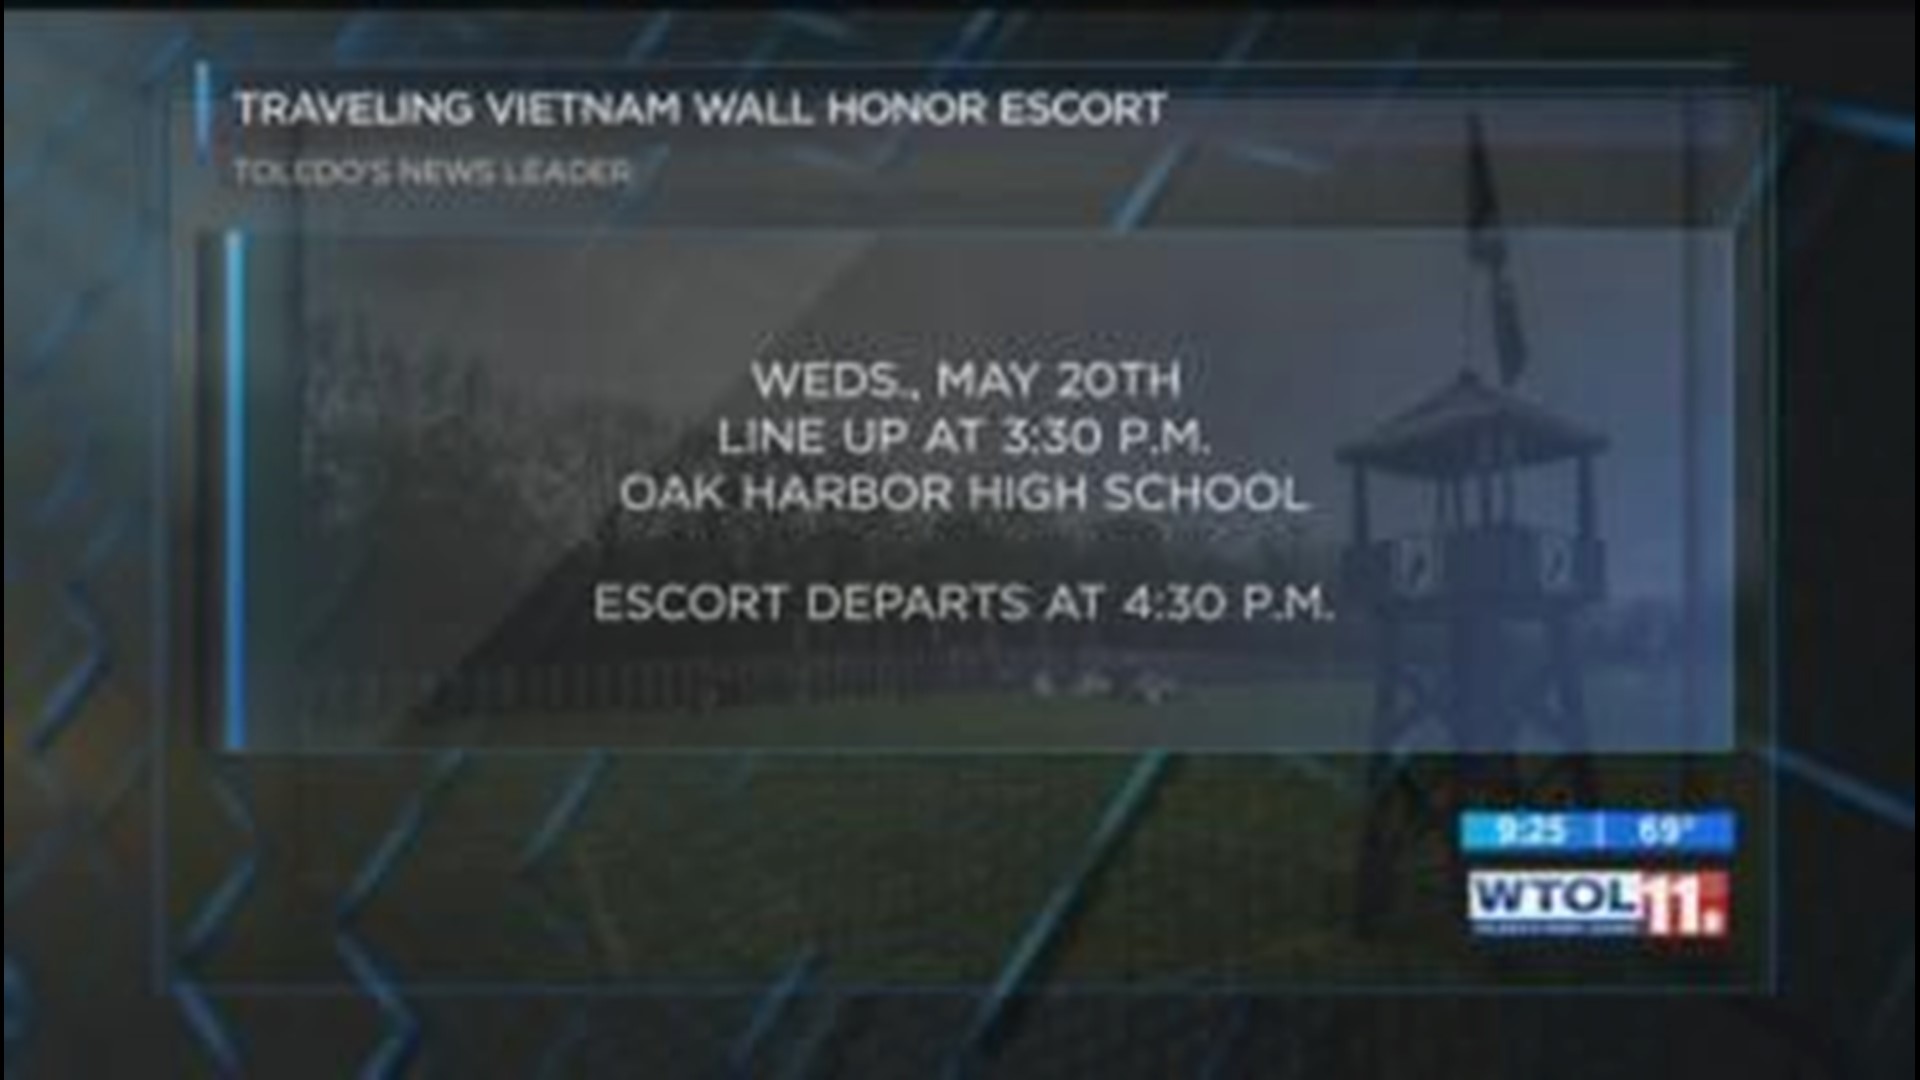 Visit the traveling Vietnam Memorial Wall at Camp Perry